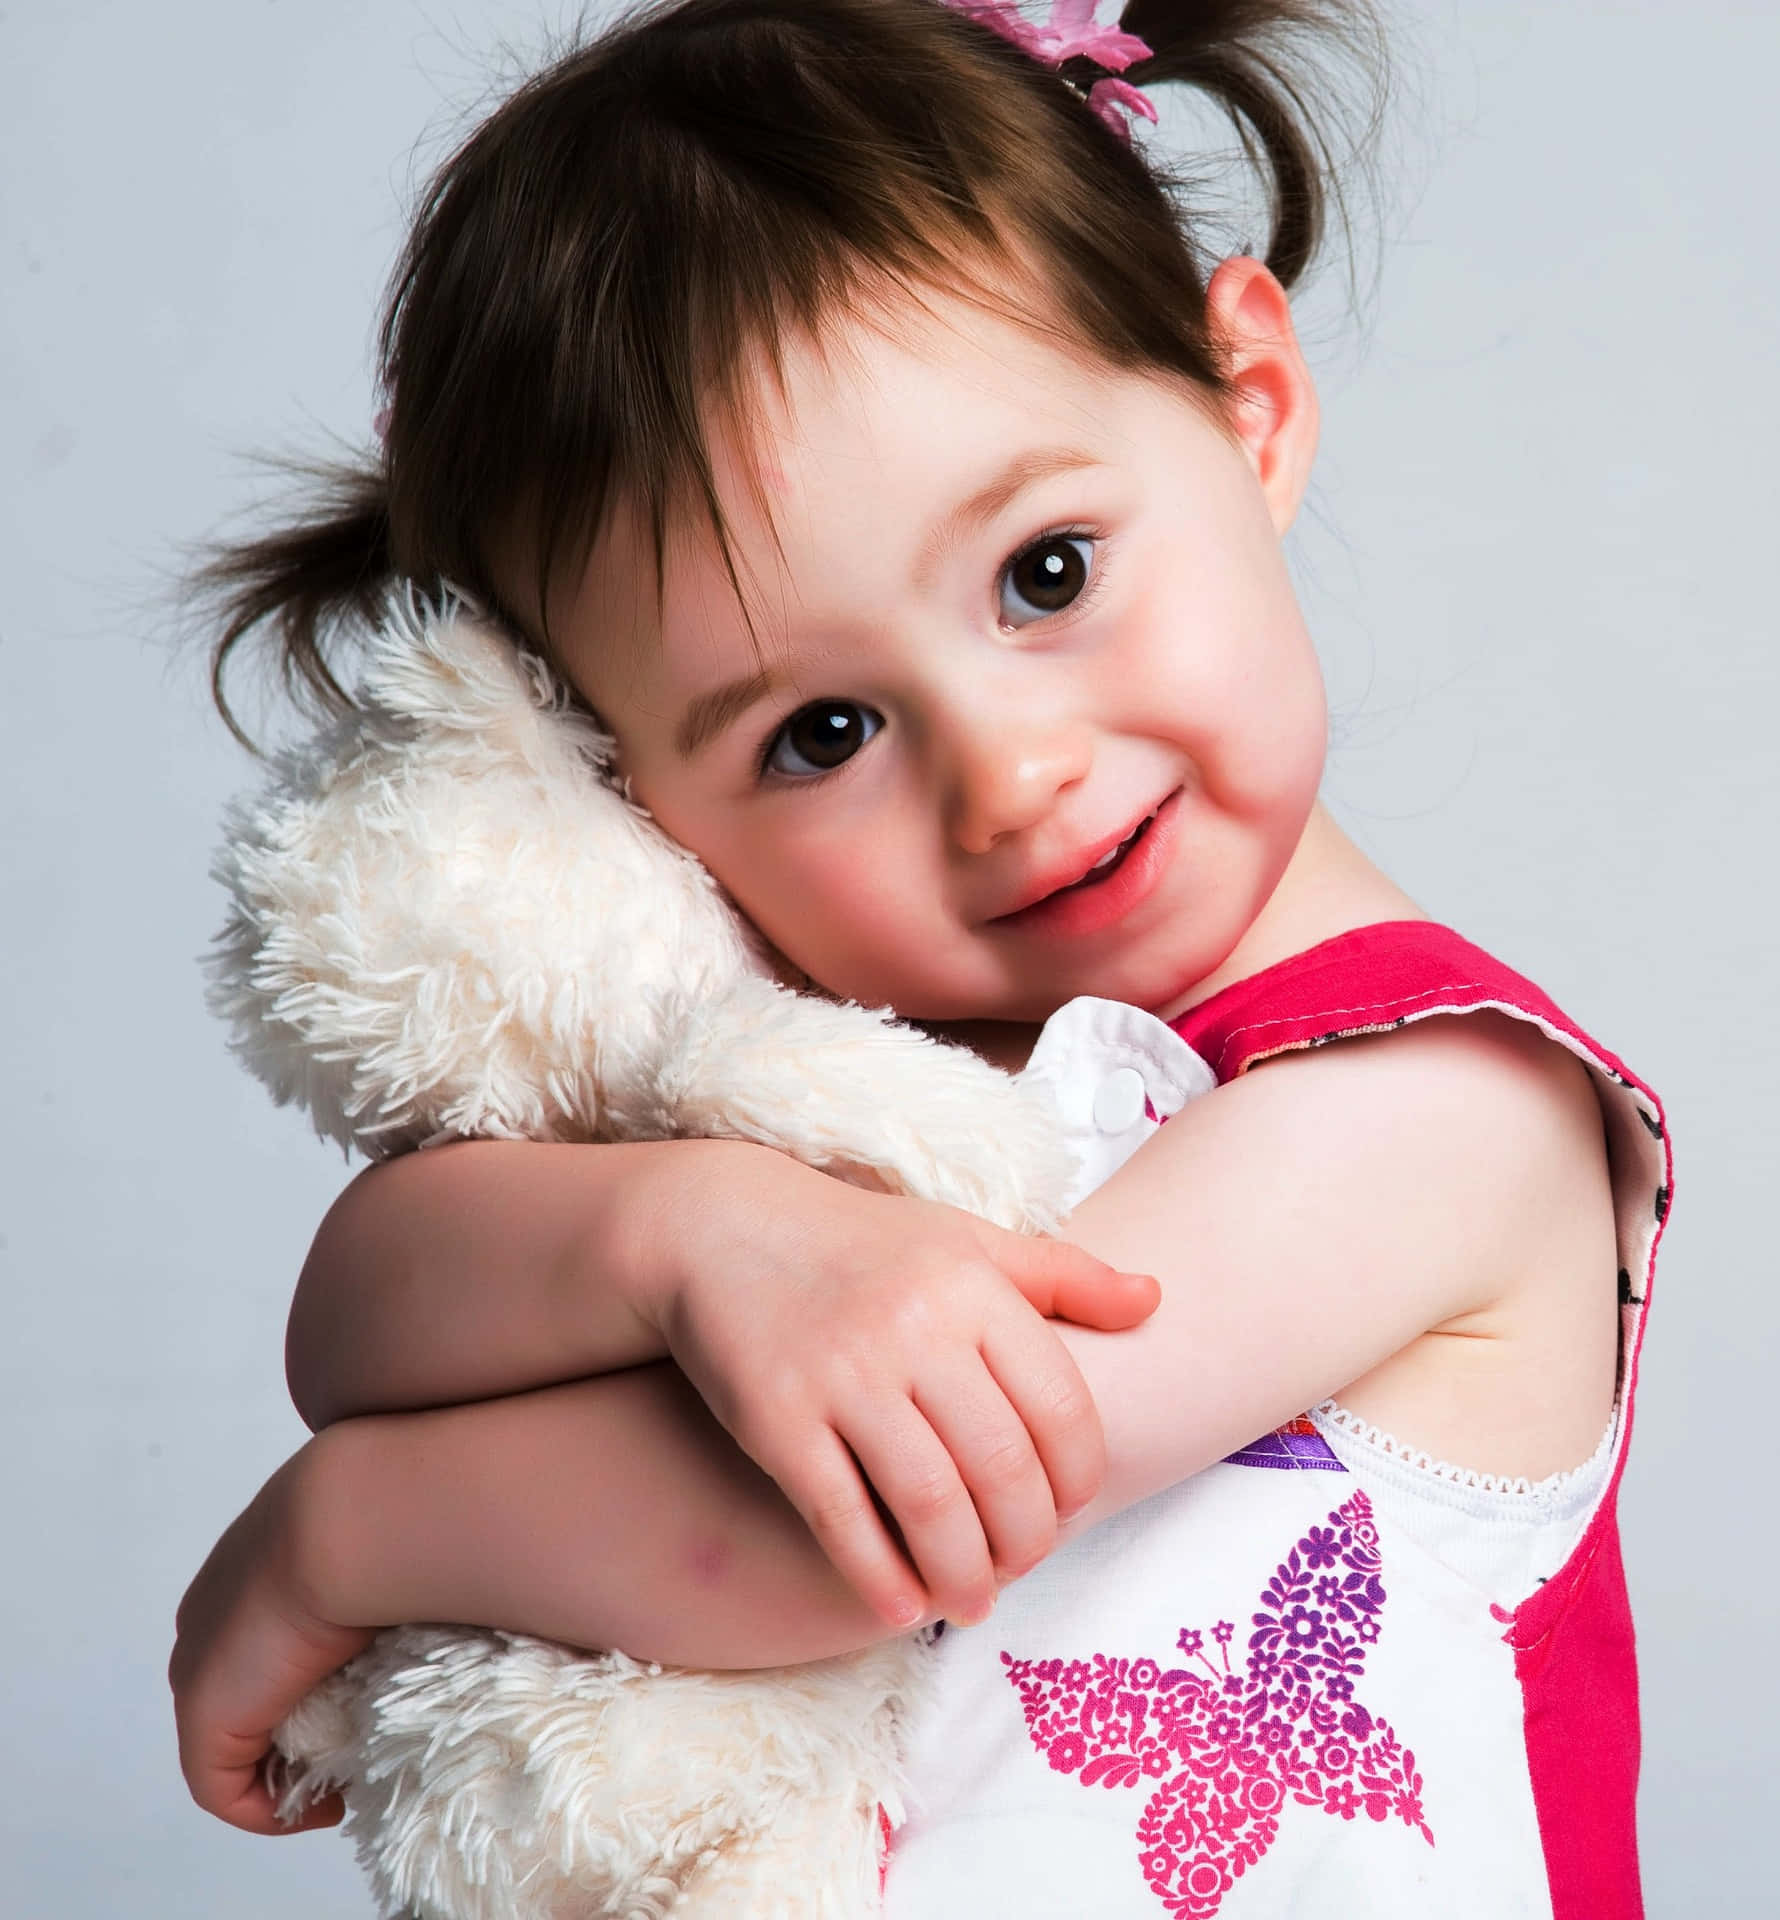 Cute Photo Of A Young Girl Hugging Her Tangible White Stuffed Toy Wallpaper